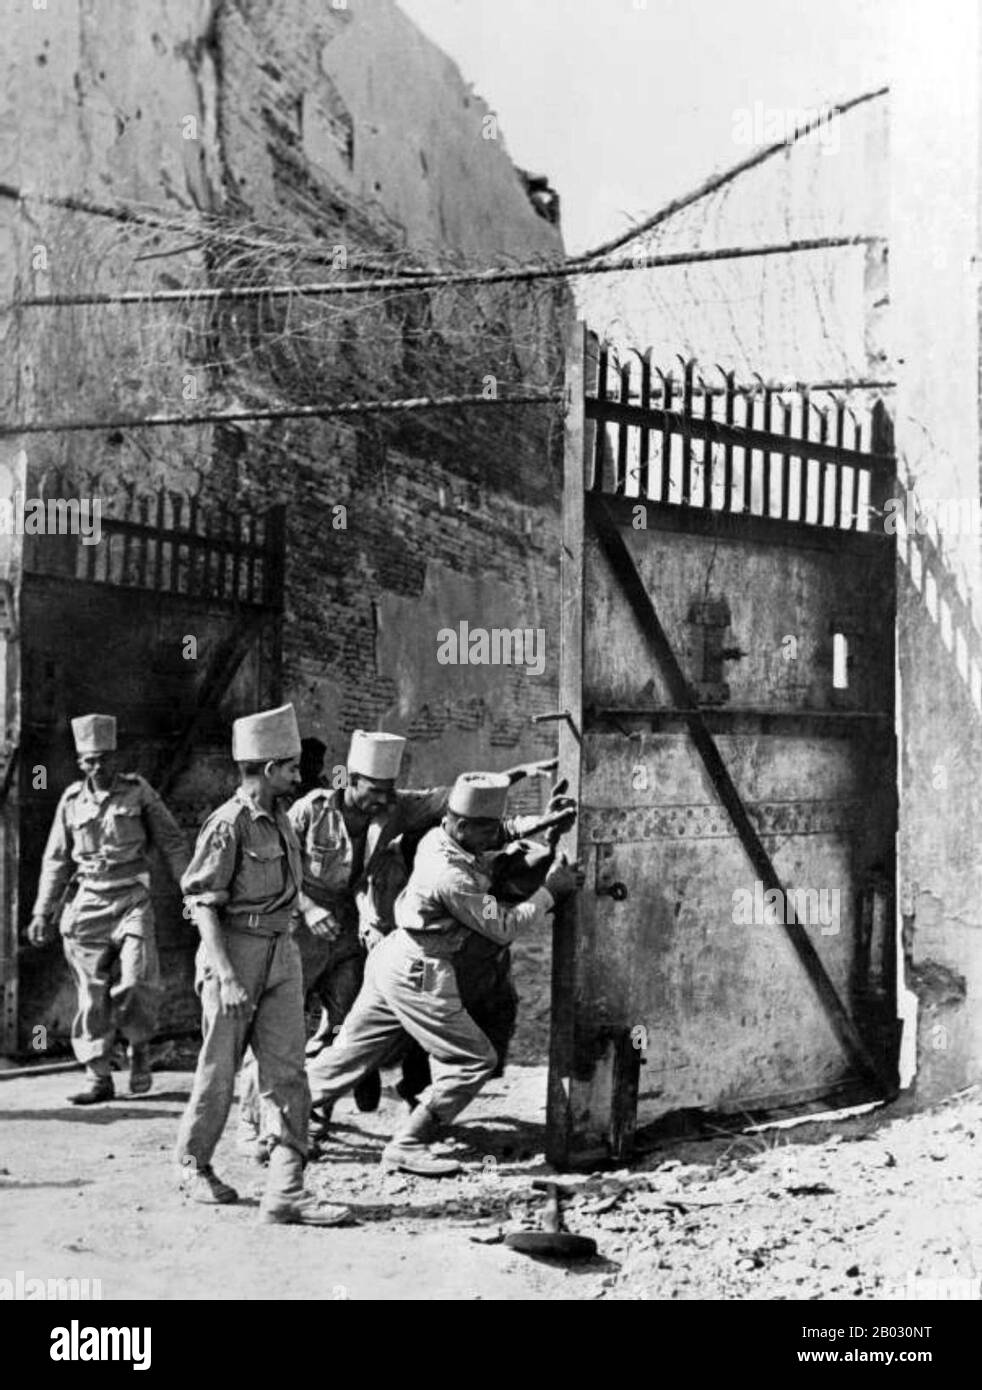 Indian soldiers of the Madras Engineer Group (MEG) try to pull the gates shut at Mandalay Palace (Fort Dufferin) following the Japanese retreat after the Allied British and Indian victory of the Battle of Meiktila and Mandalay during the Burma Campaign. Mandalay, Mandalay Region, Burma (Myanmar). March 1945. Stock Photo